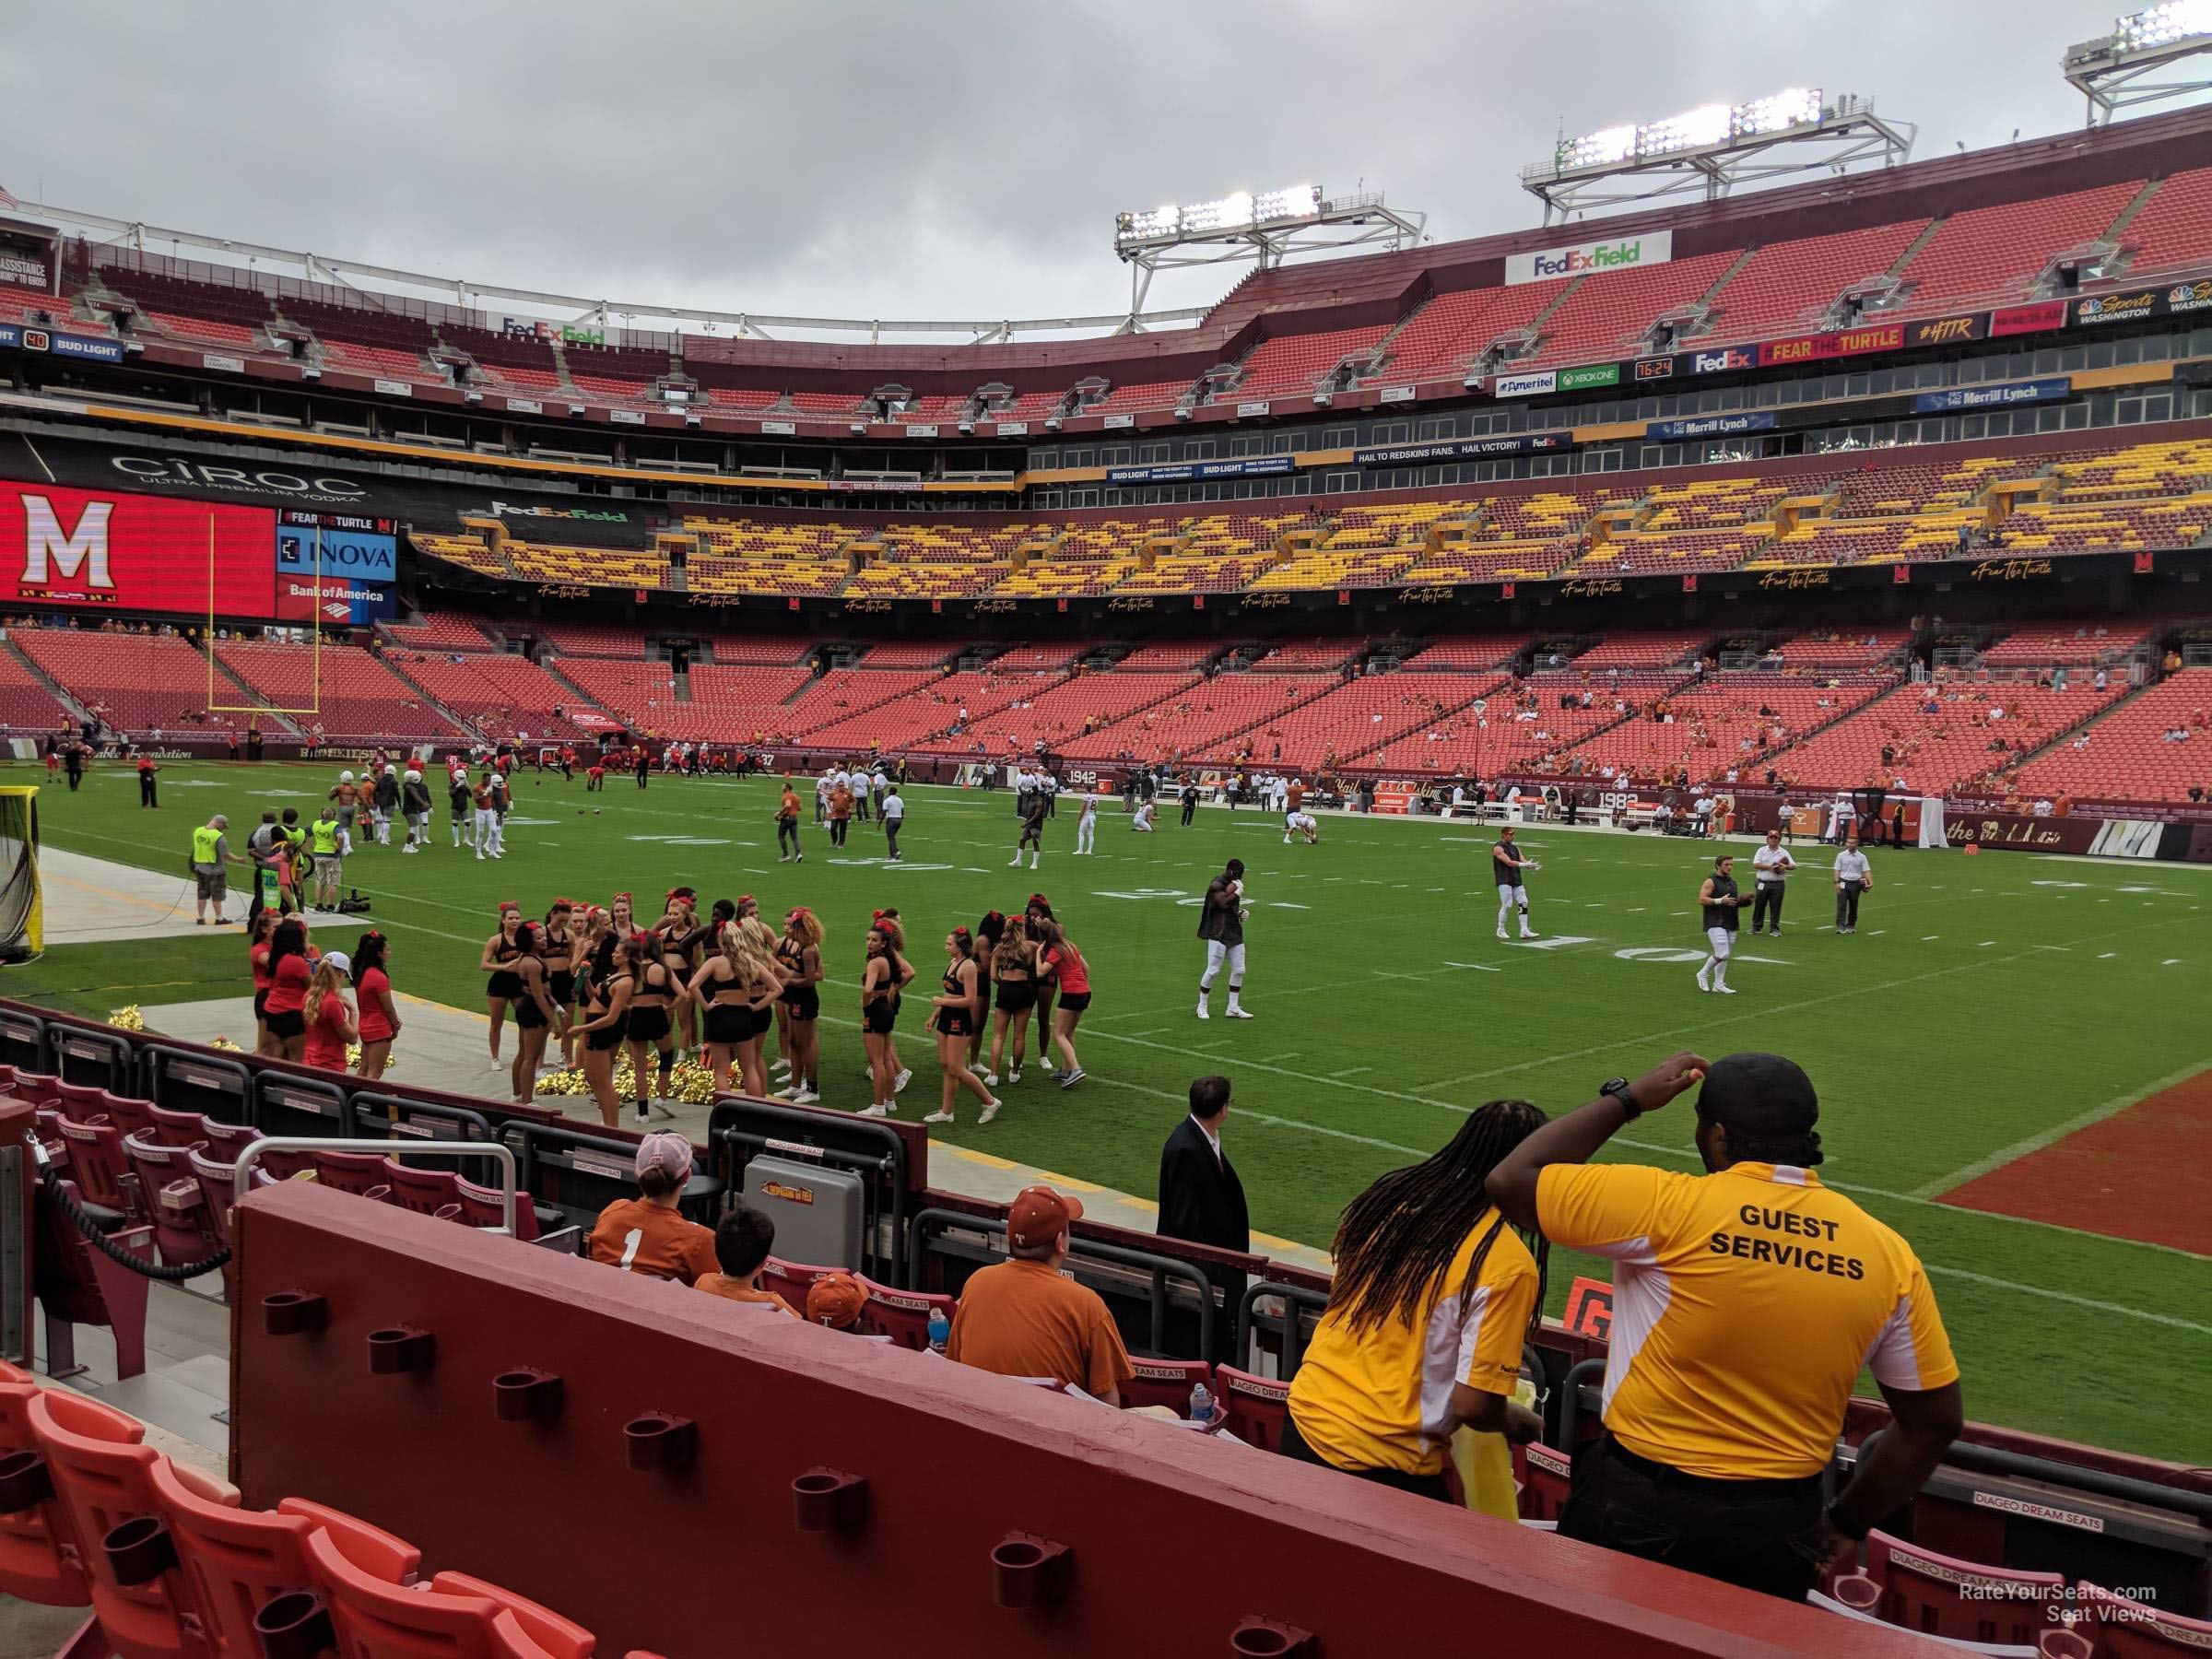 section 138, row 4 seat view  - fedexfield